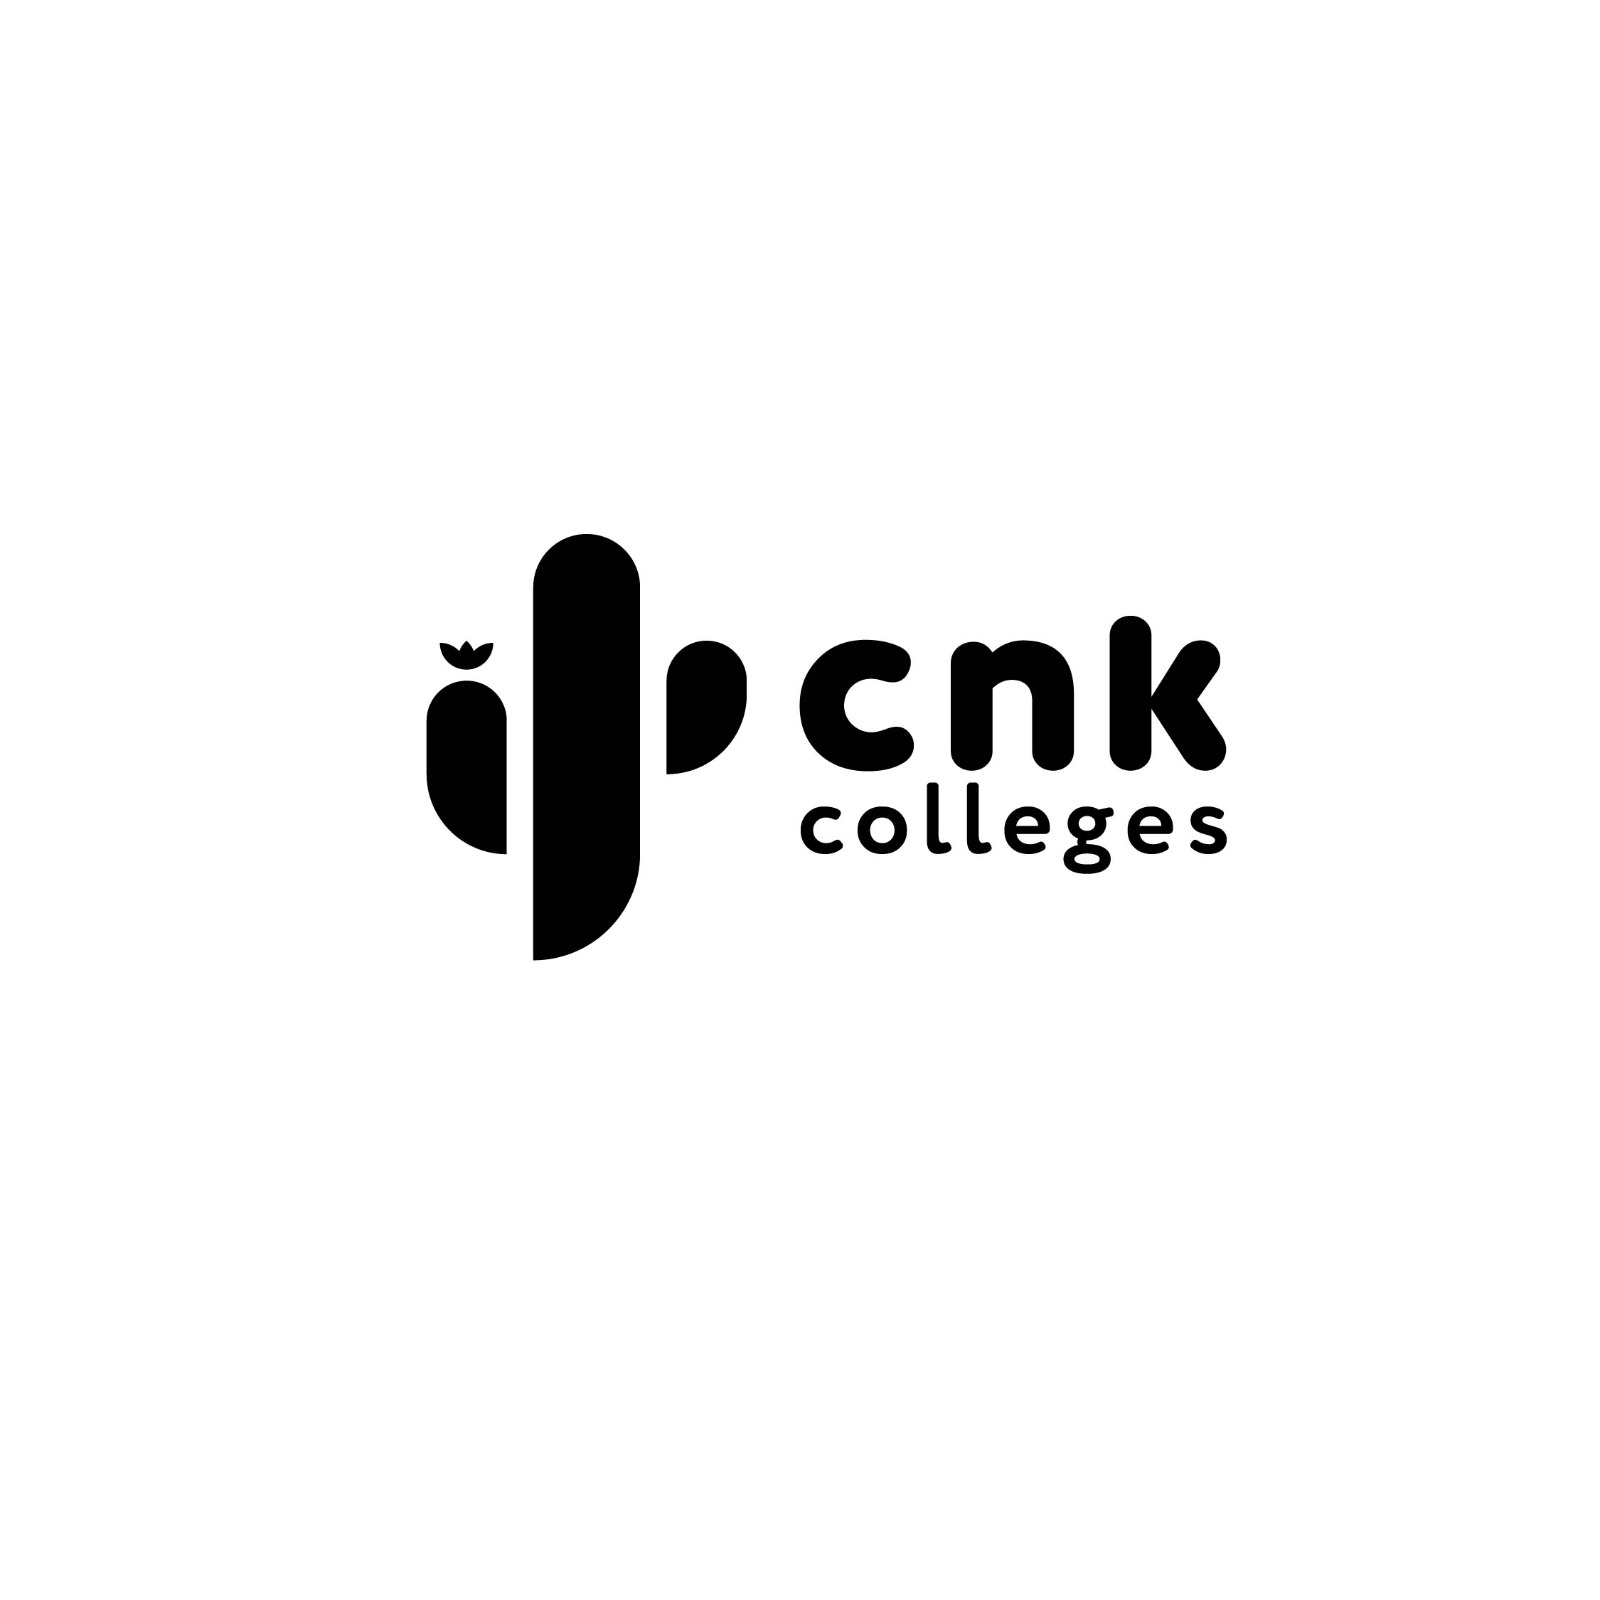 CNK colleges